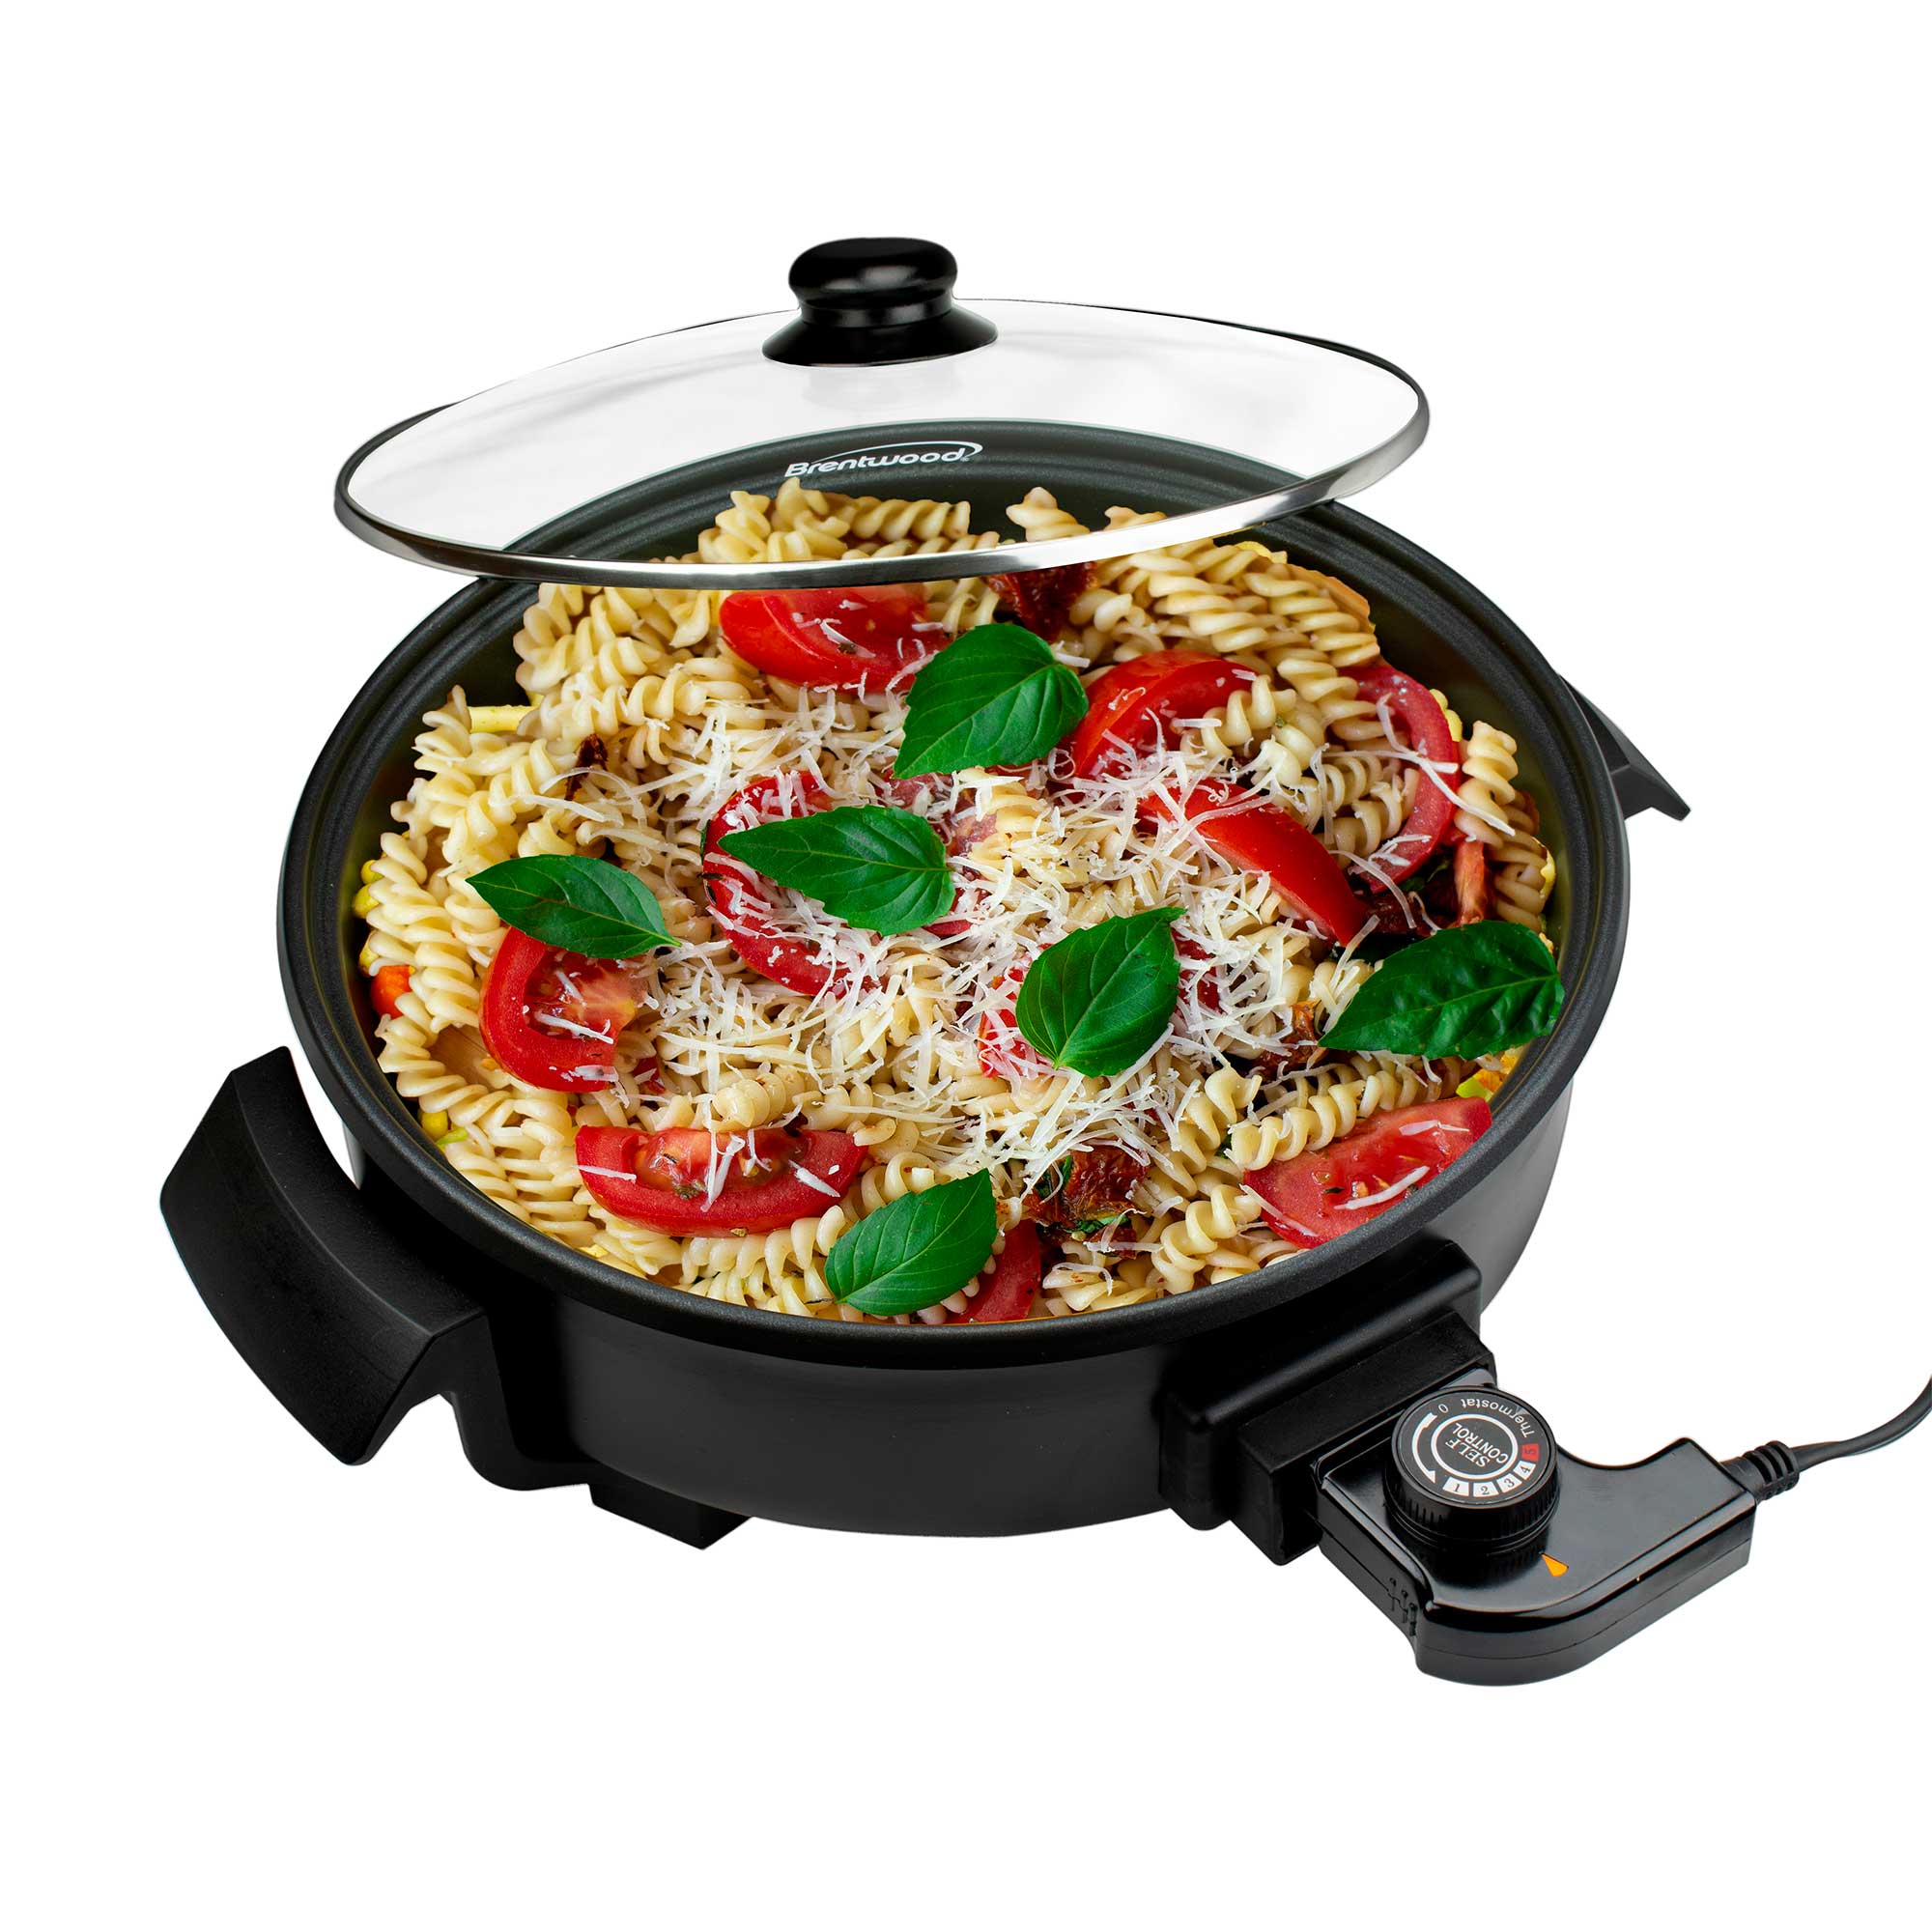 Brentwood SK 66 Non Stick Copper Electric Skillet With Glass Lid 12 14 x 18  Black - Office Depot